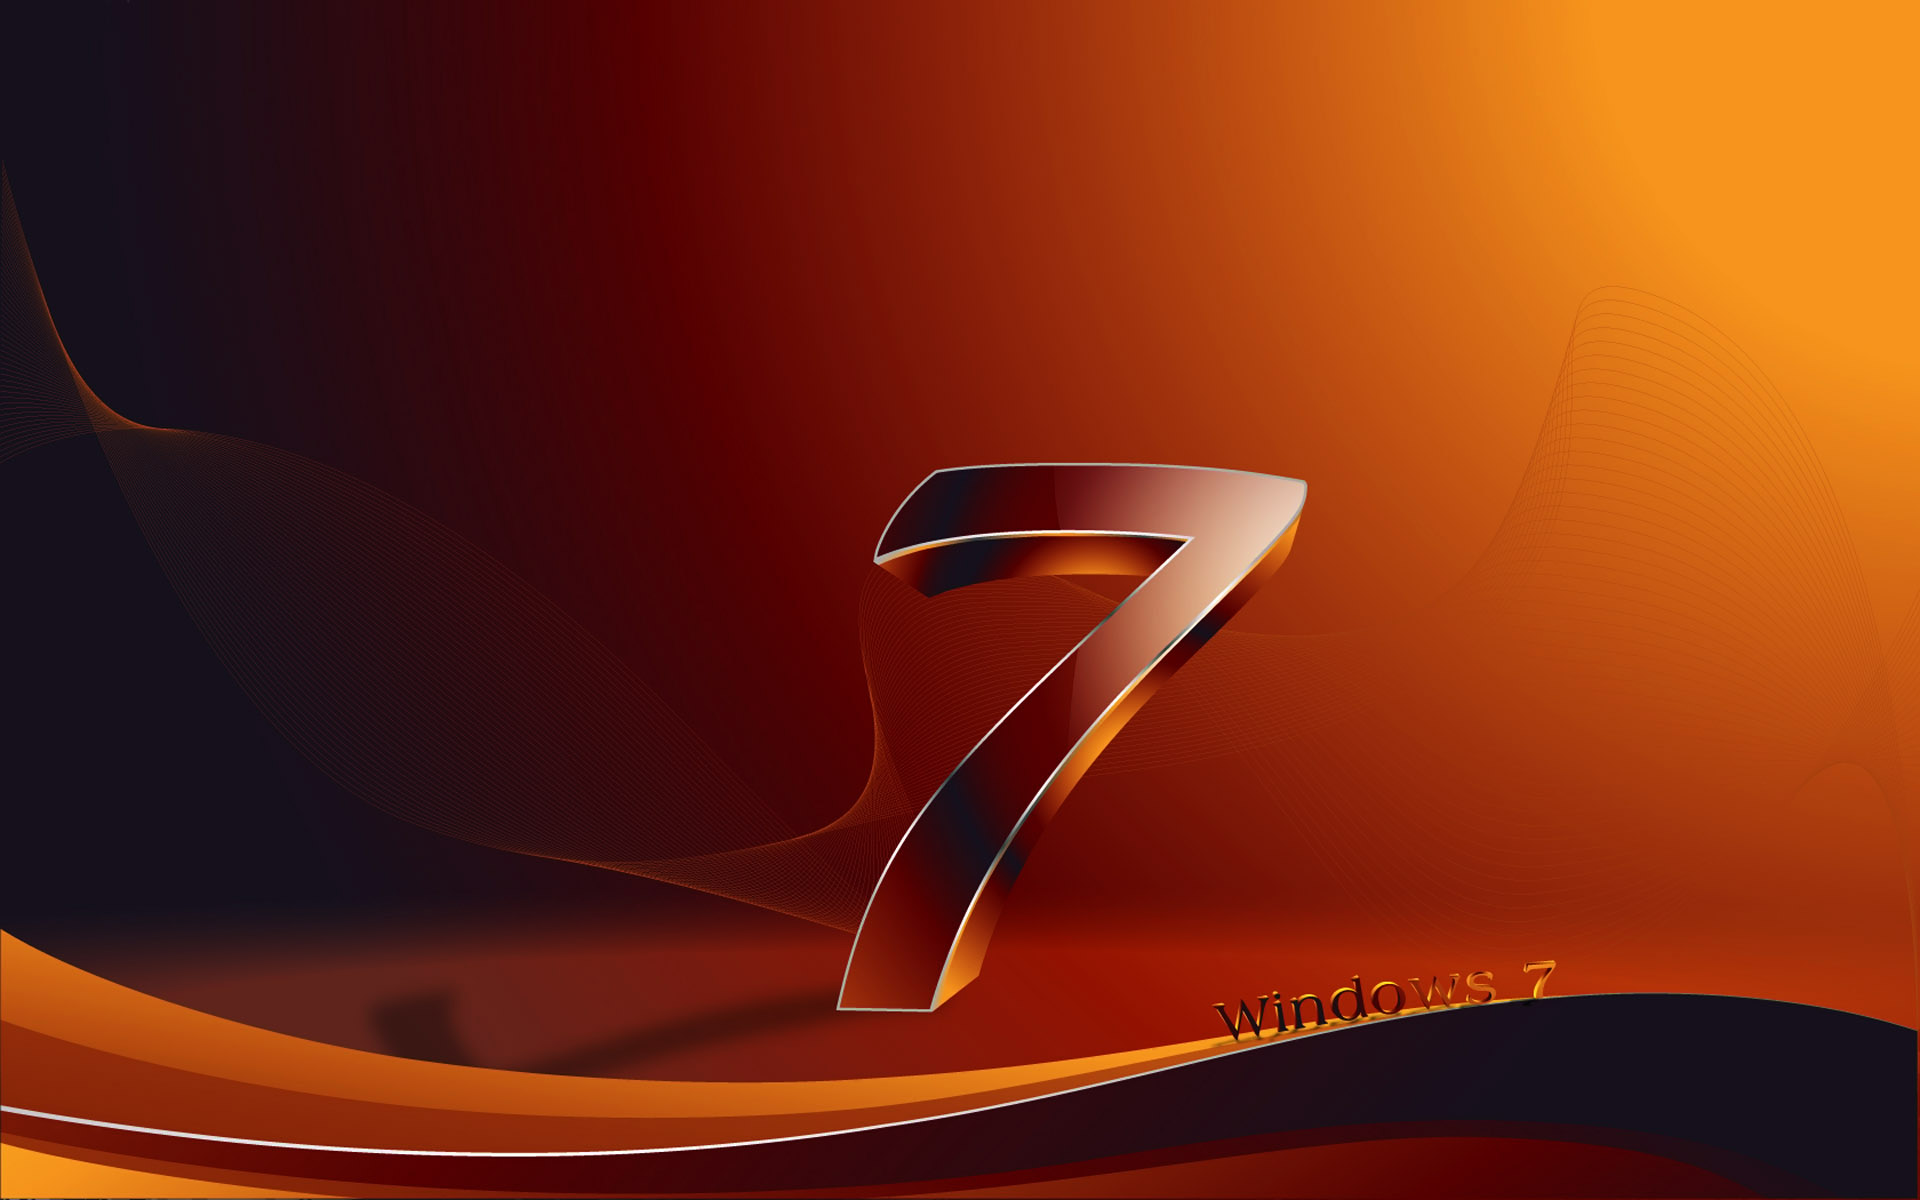 Free download 3D Windows 7 Wallpapers HD Wallpapers [1920x1200] for